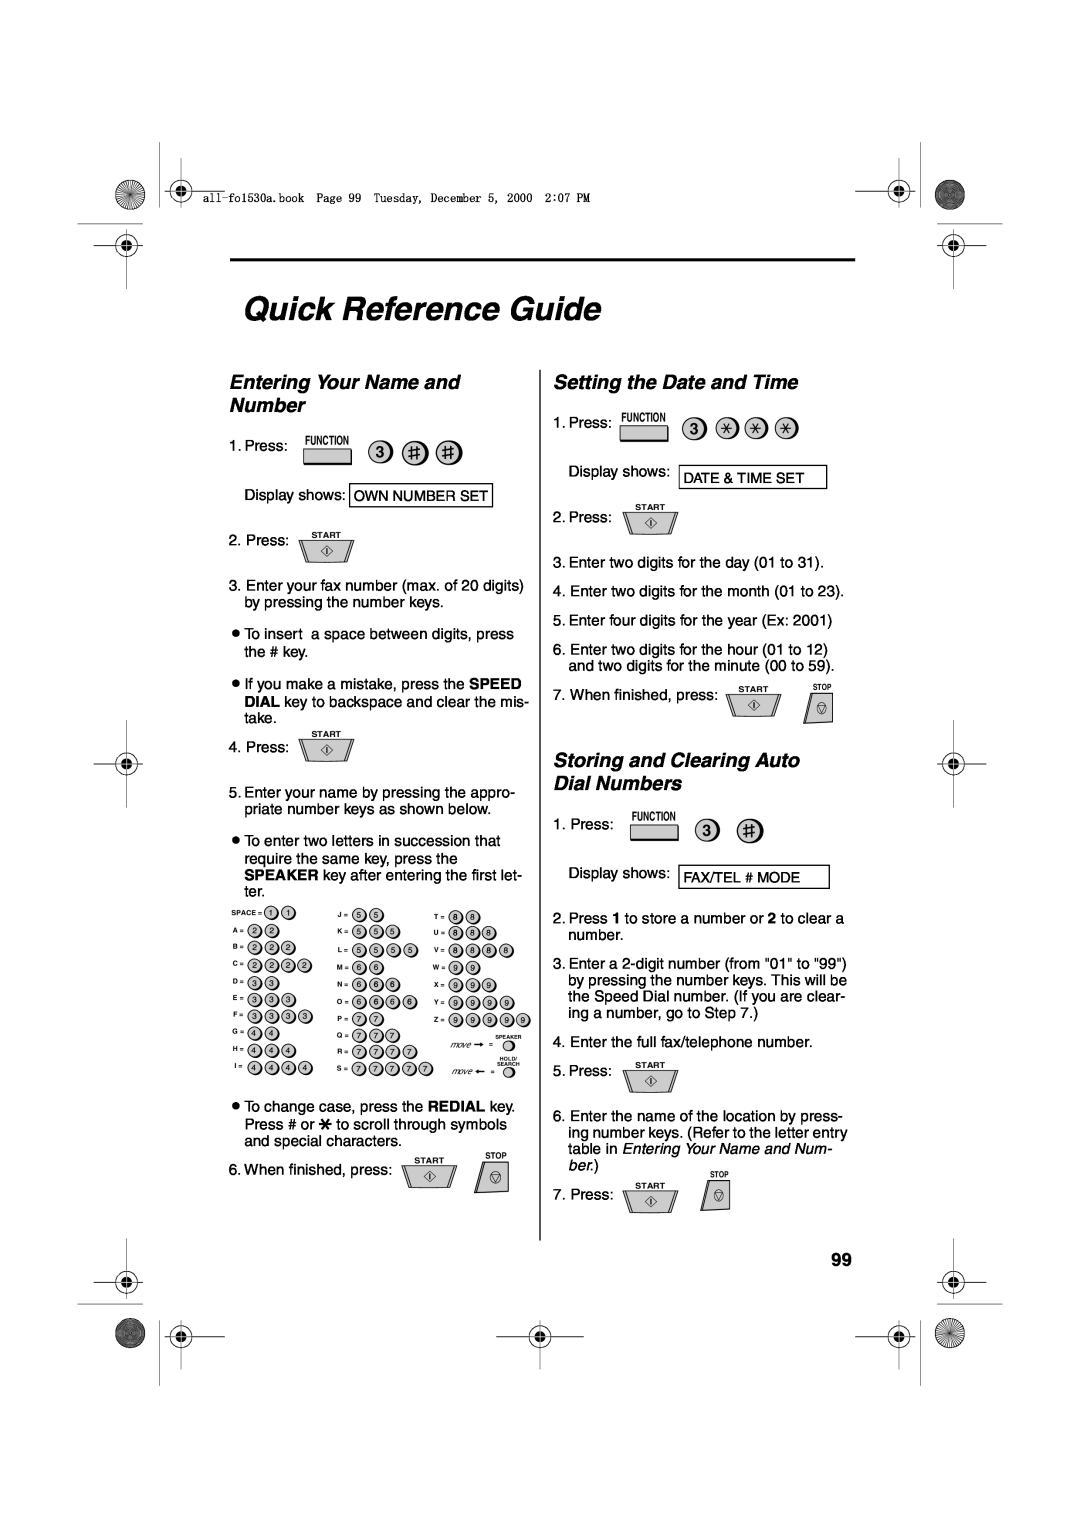 Sharp FO-1530 Quick Reference Guide, Entering Your Name and Number, Setting the Date and Time, When finished, press 